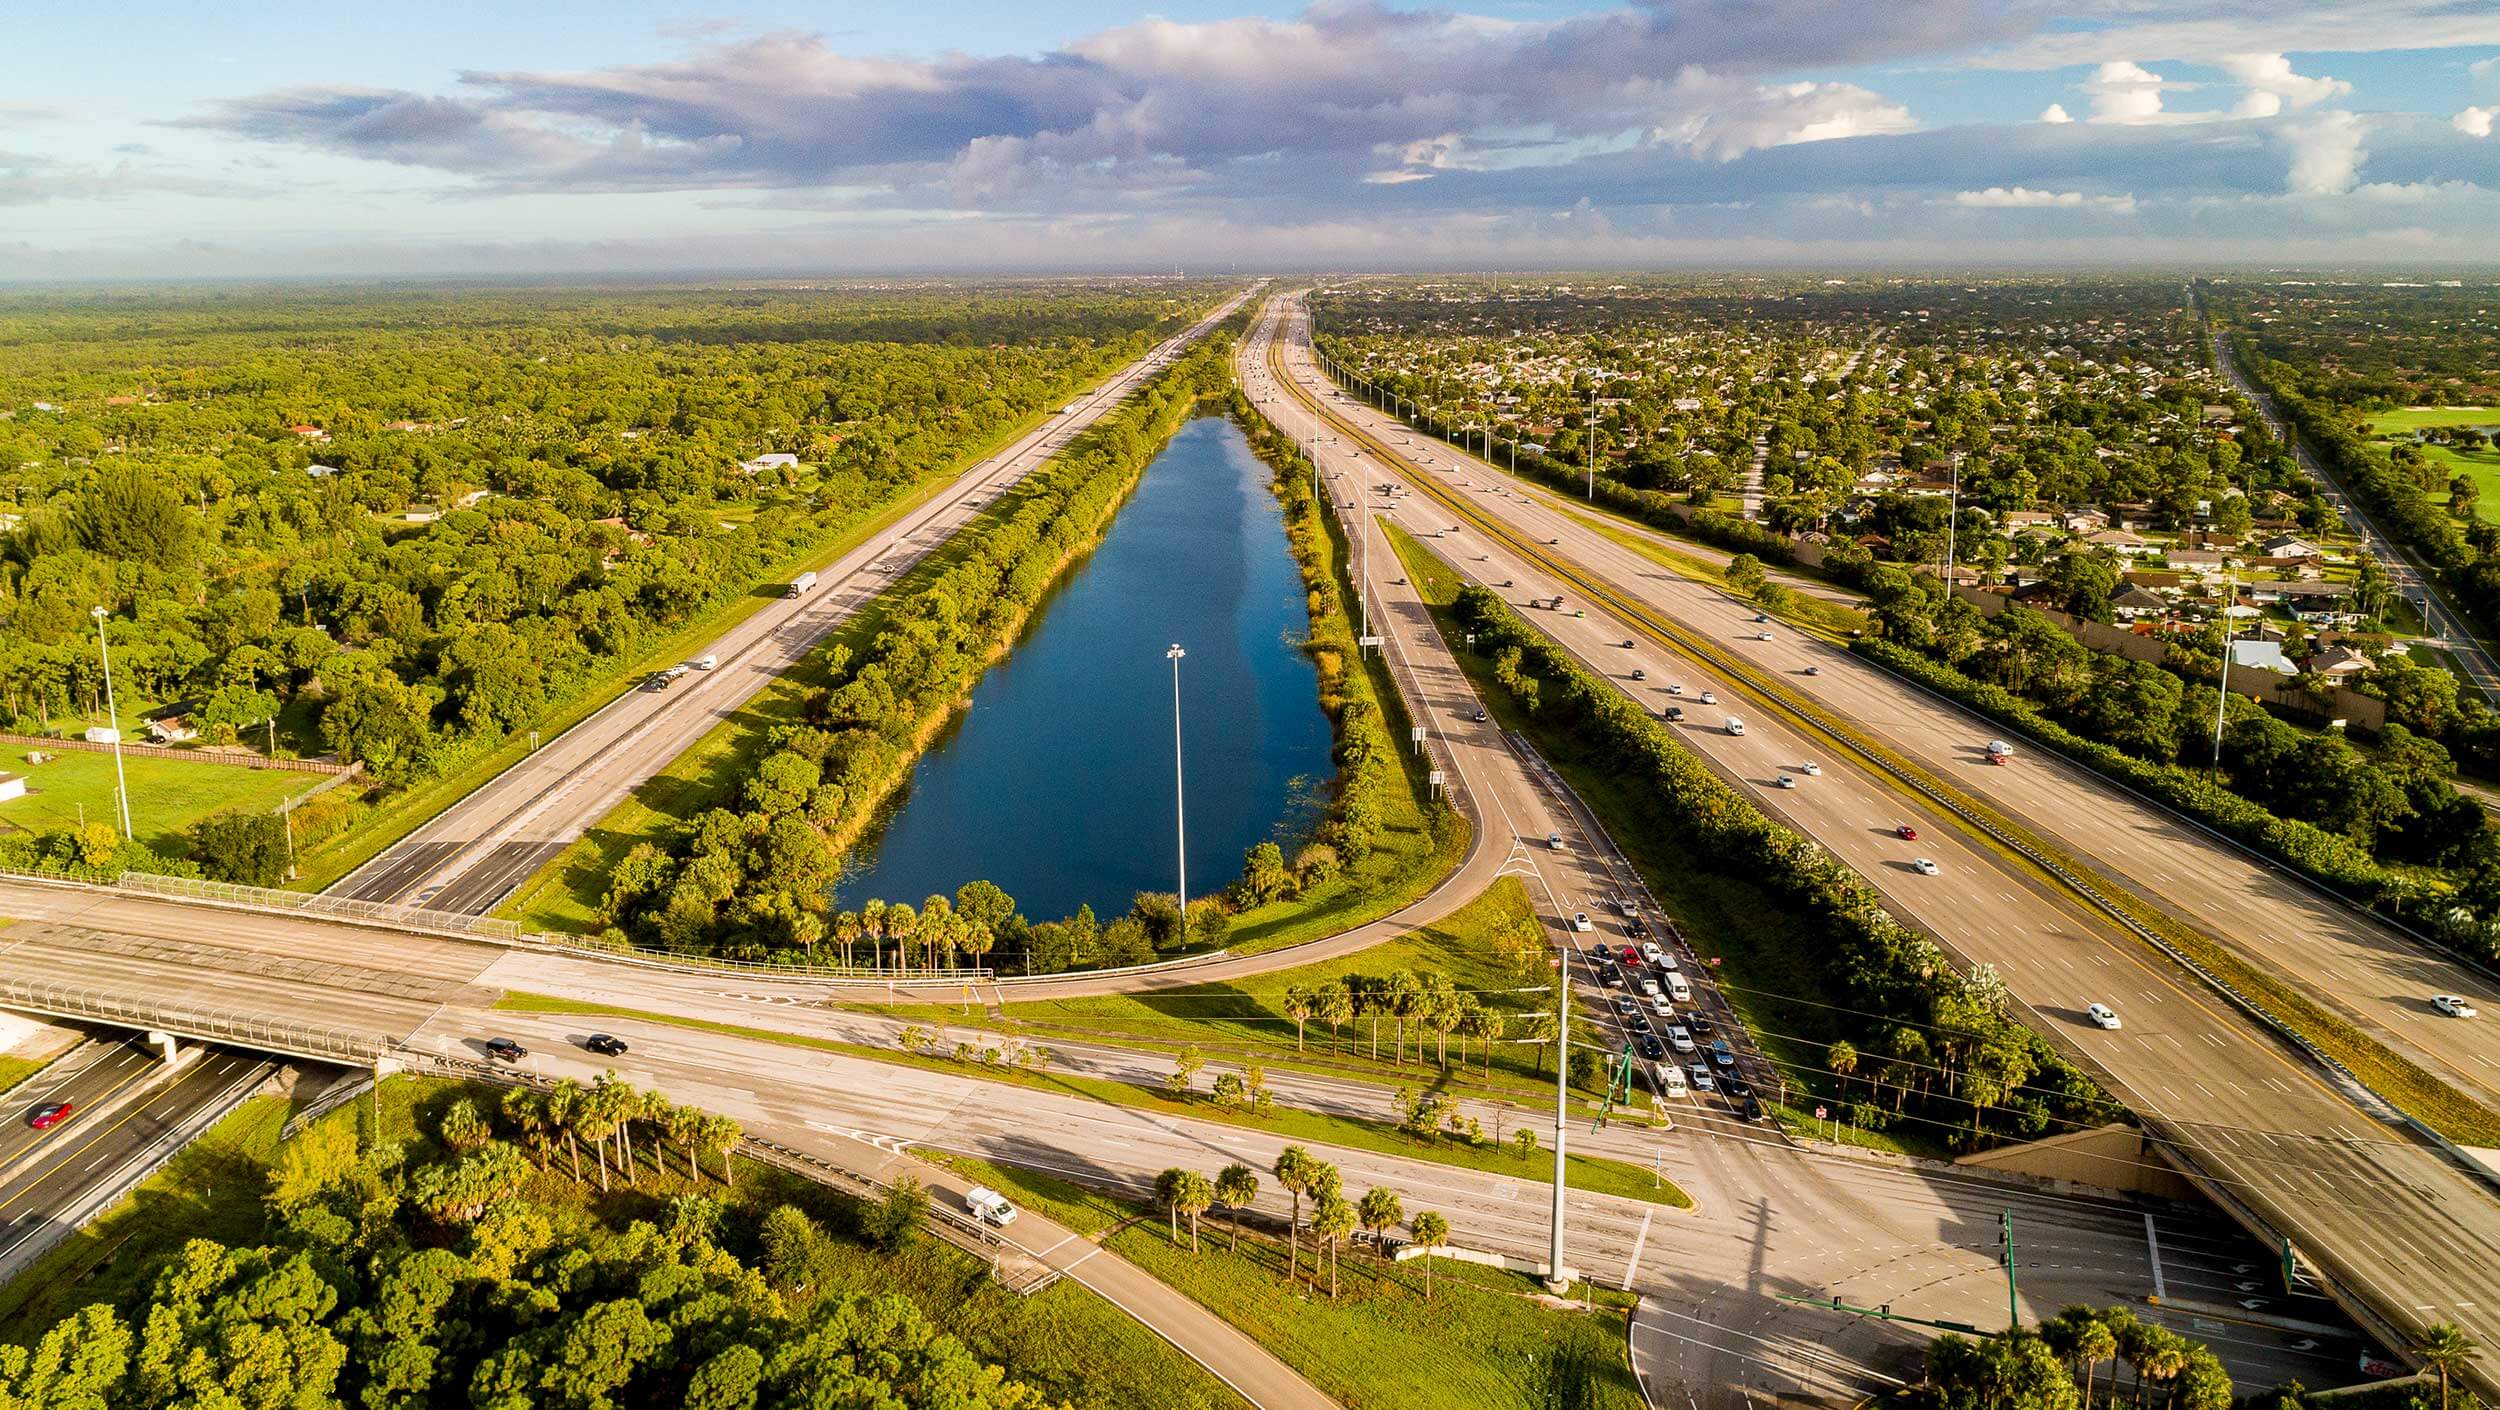 A view of intersecting roads and interstates in Florida